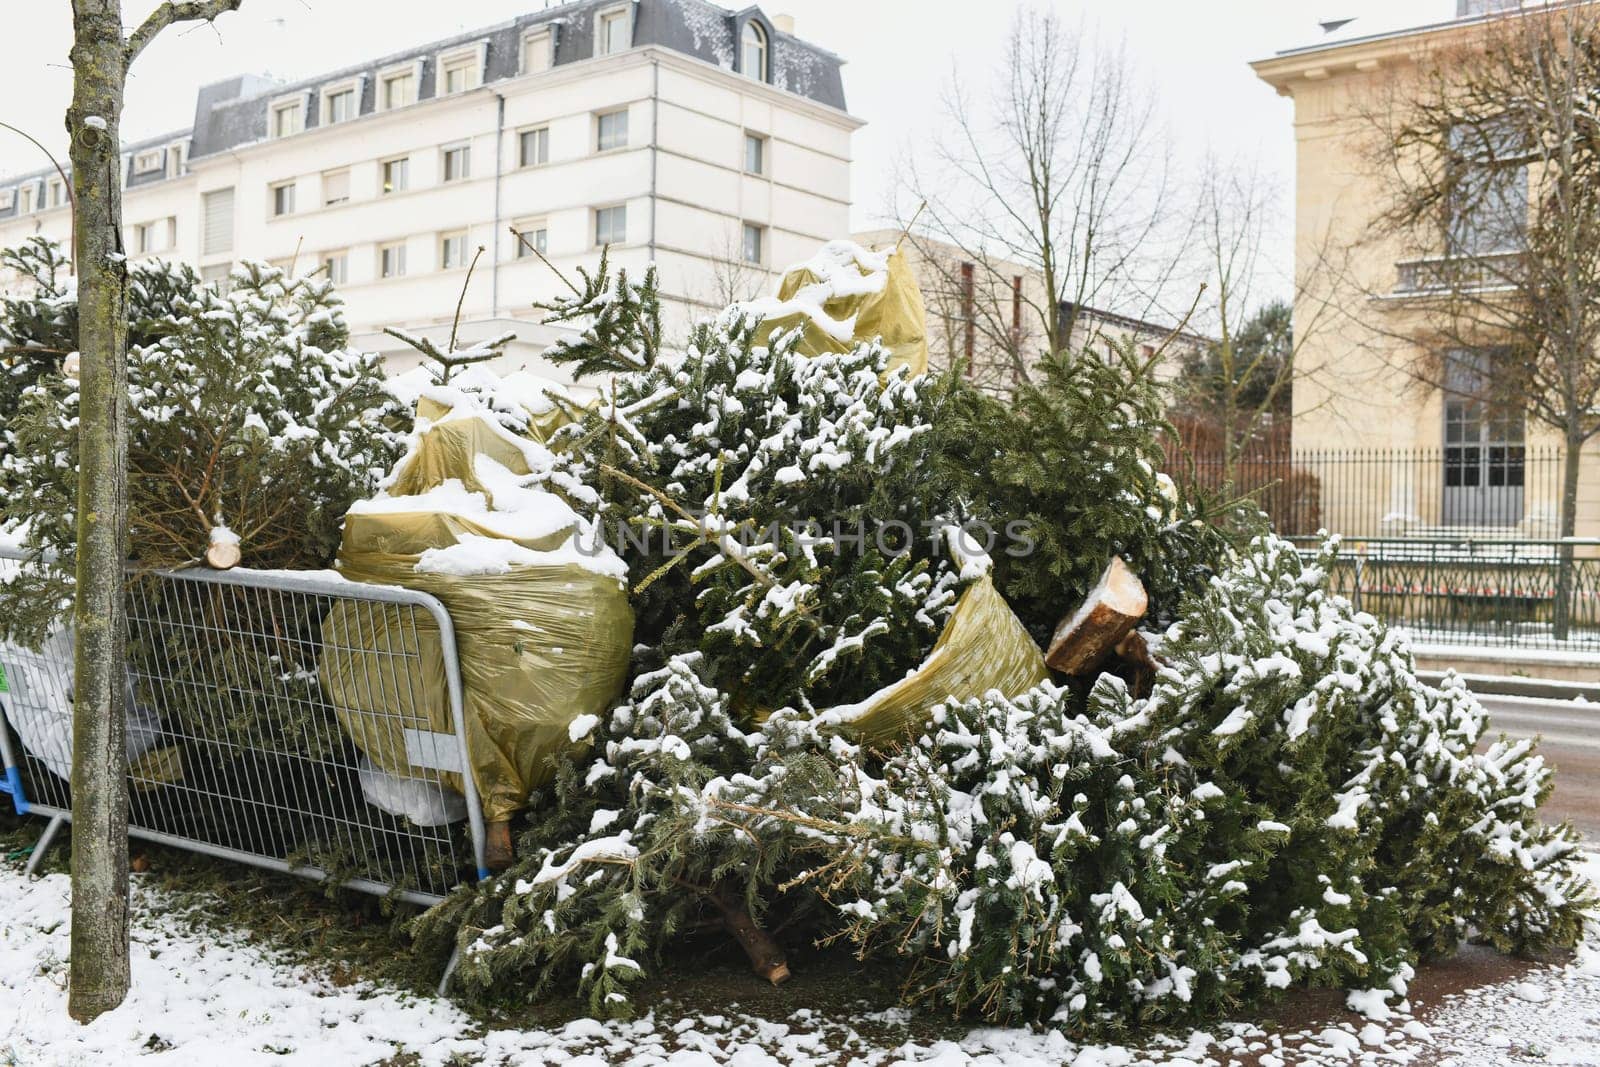 Used Christmas trees behind the fence in France by Godi